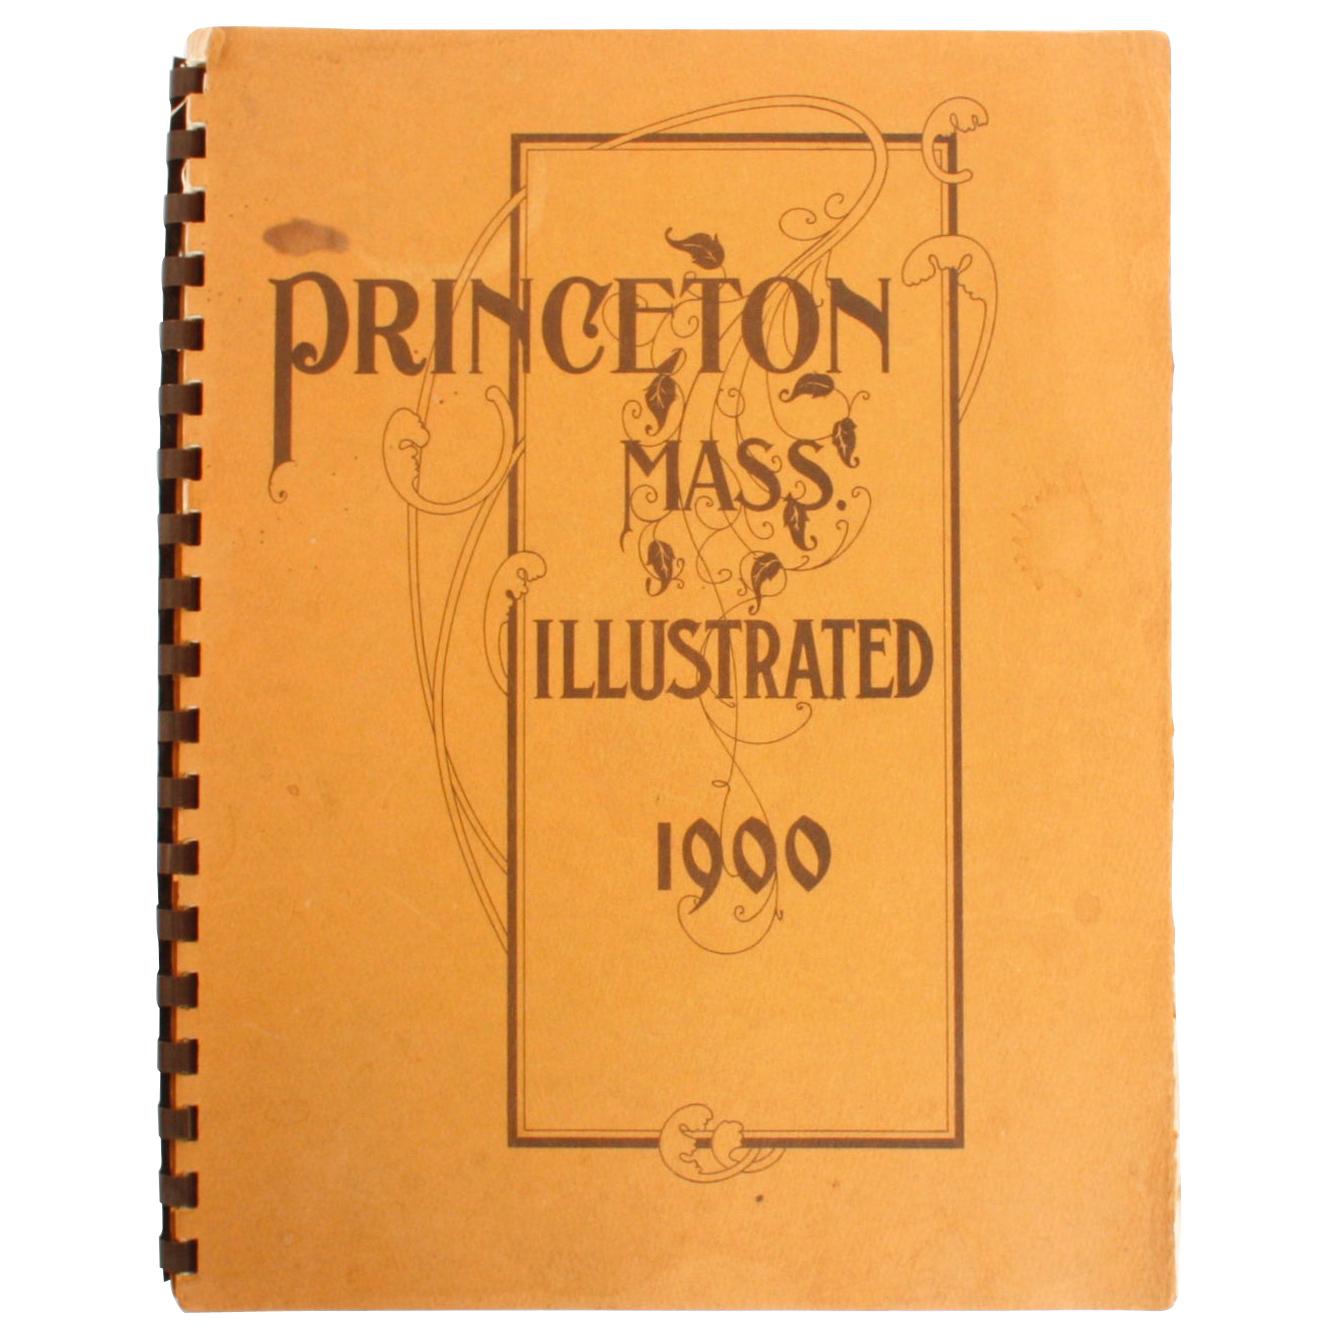 Princeton Mass, Illustrated 1900, as of 1972